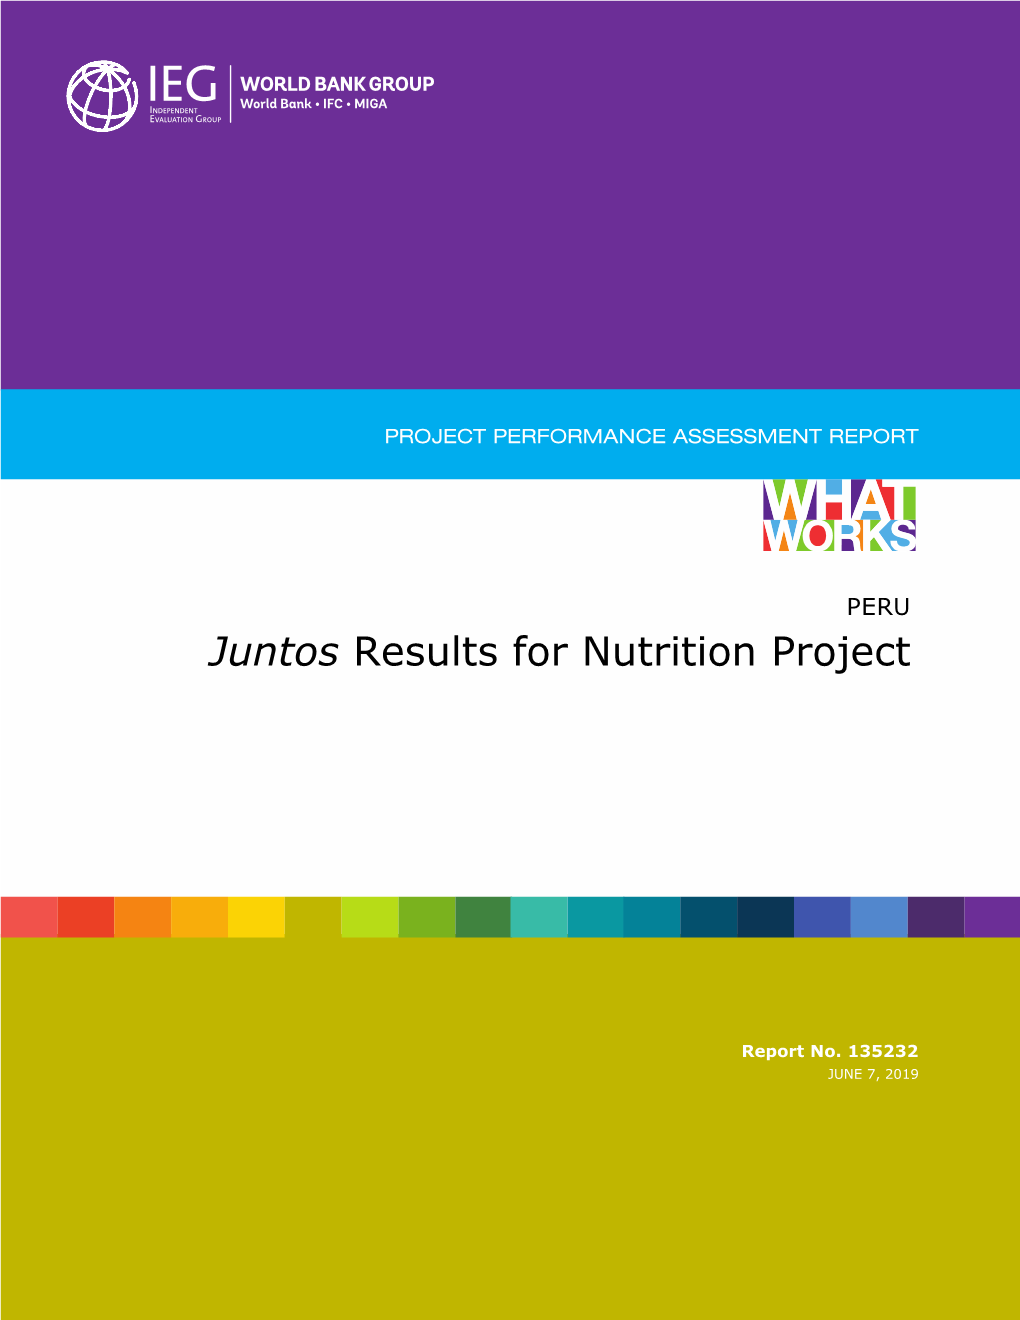 Peru: Juntos Results for Nutrition Project